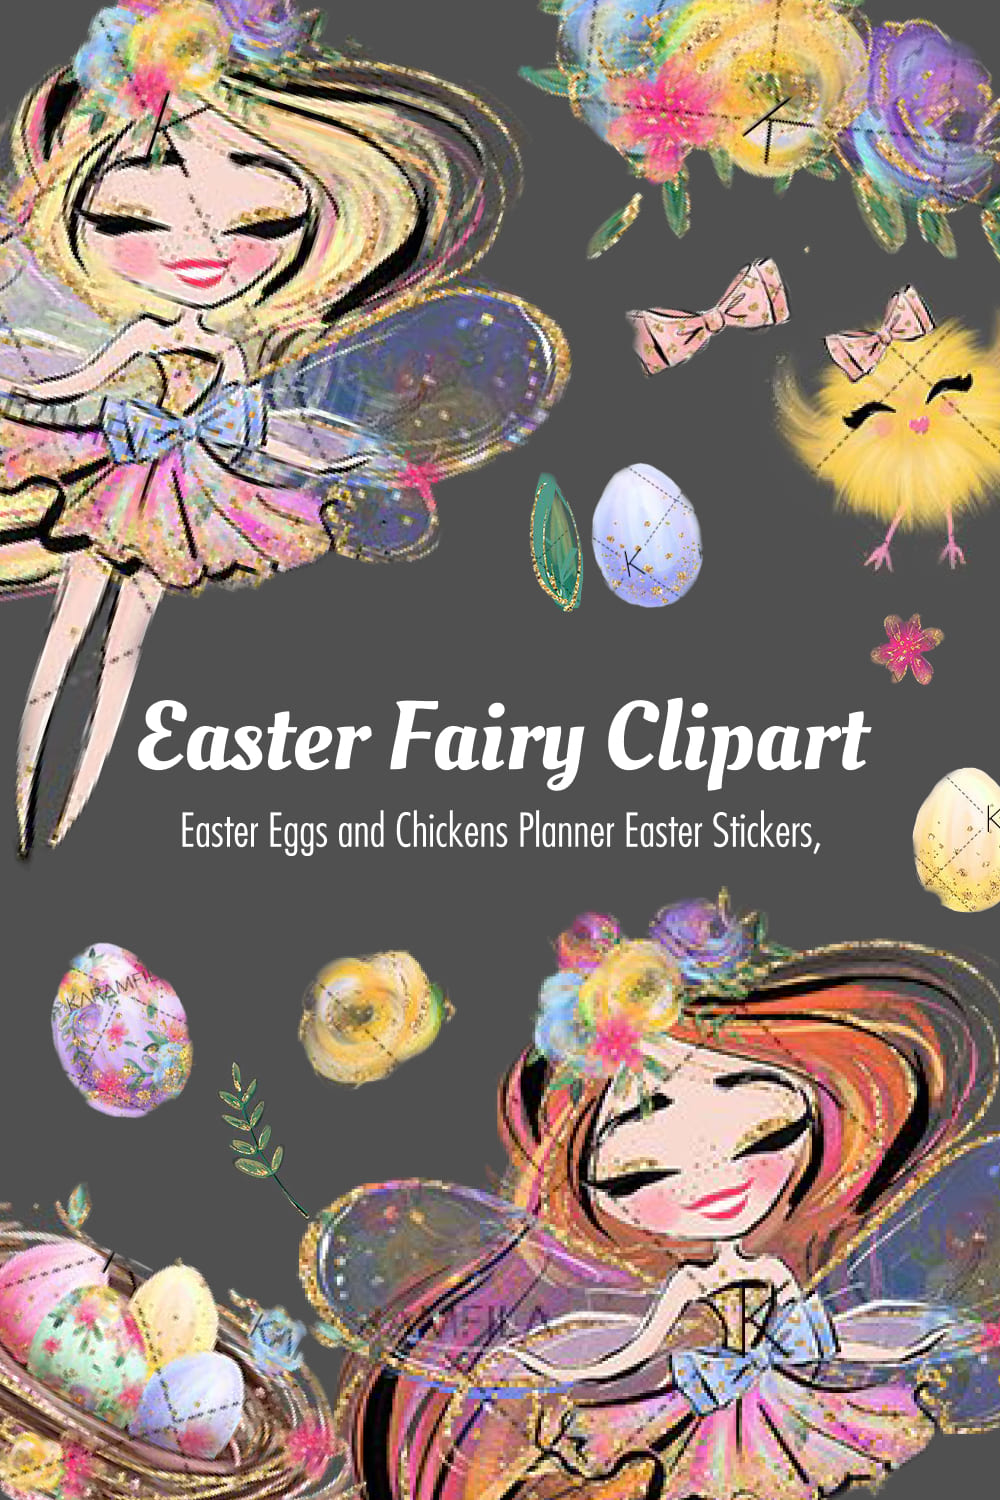 Easter Fairy Clipart and Chickens Planner Easter Stickets.